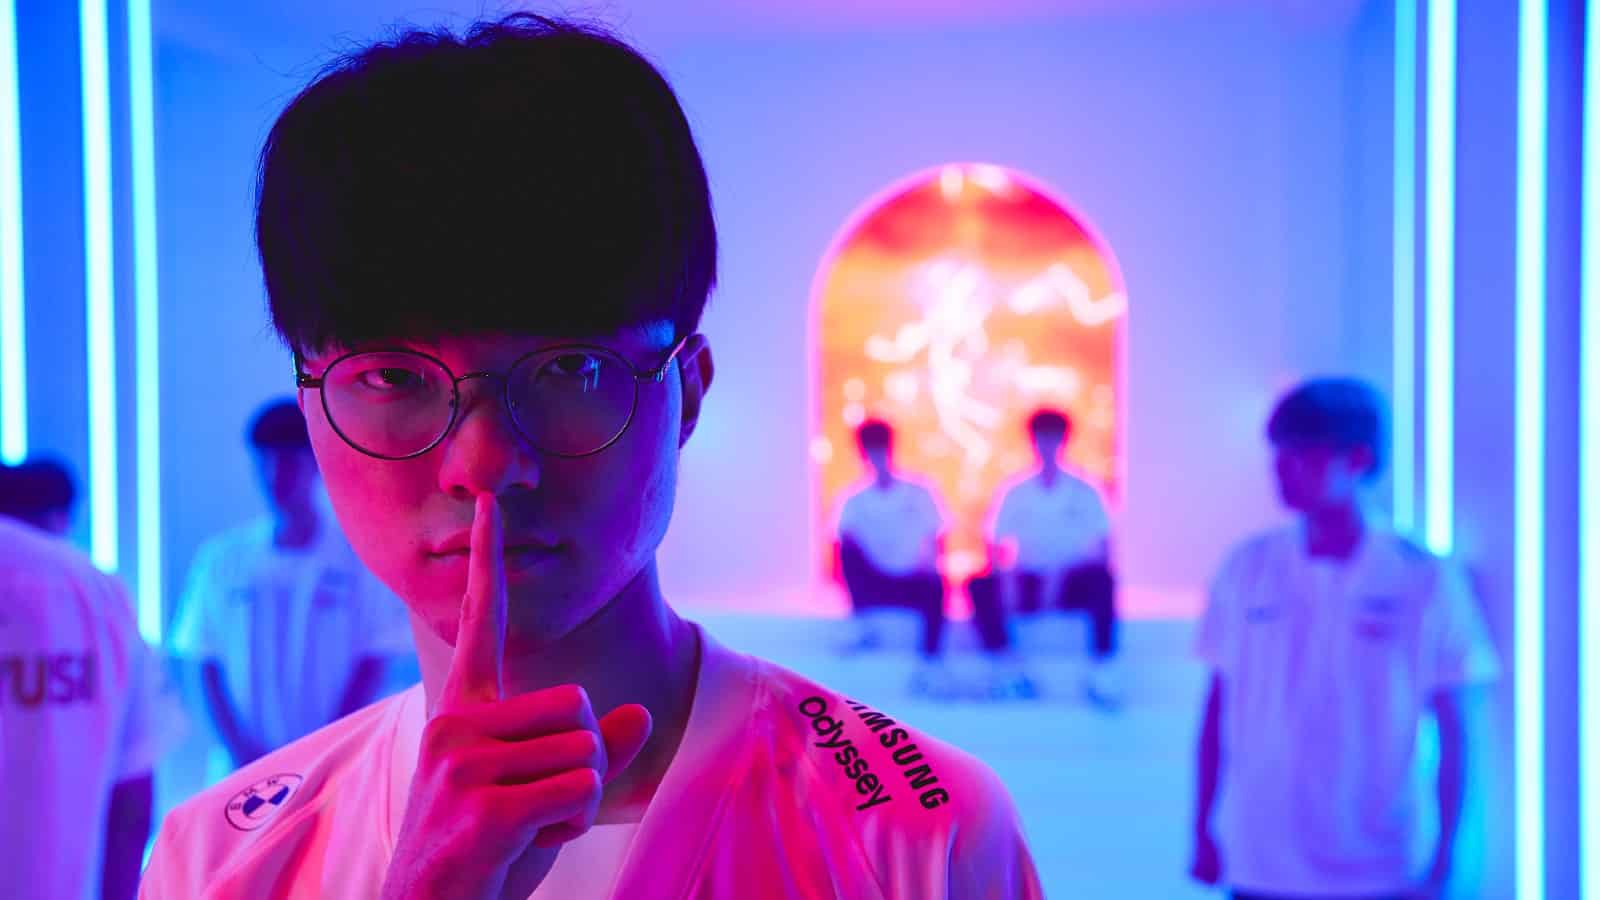 League of Legends icon Faker re-signs with T1 for 2023